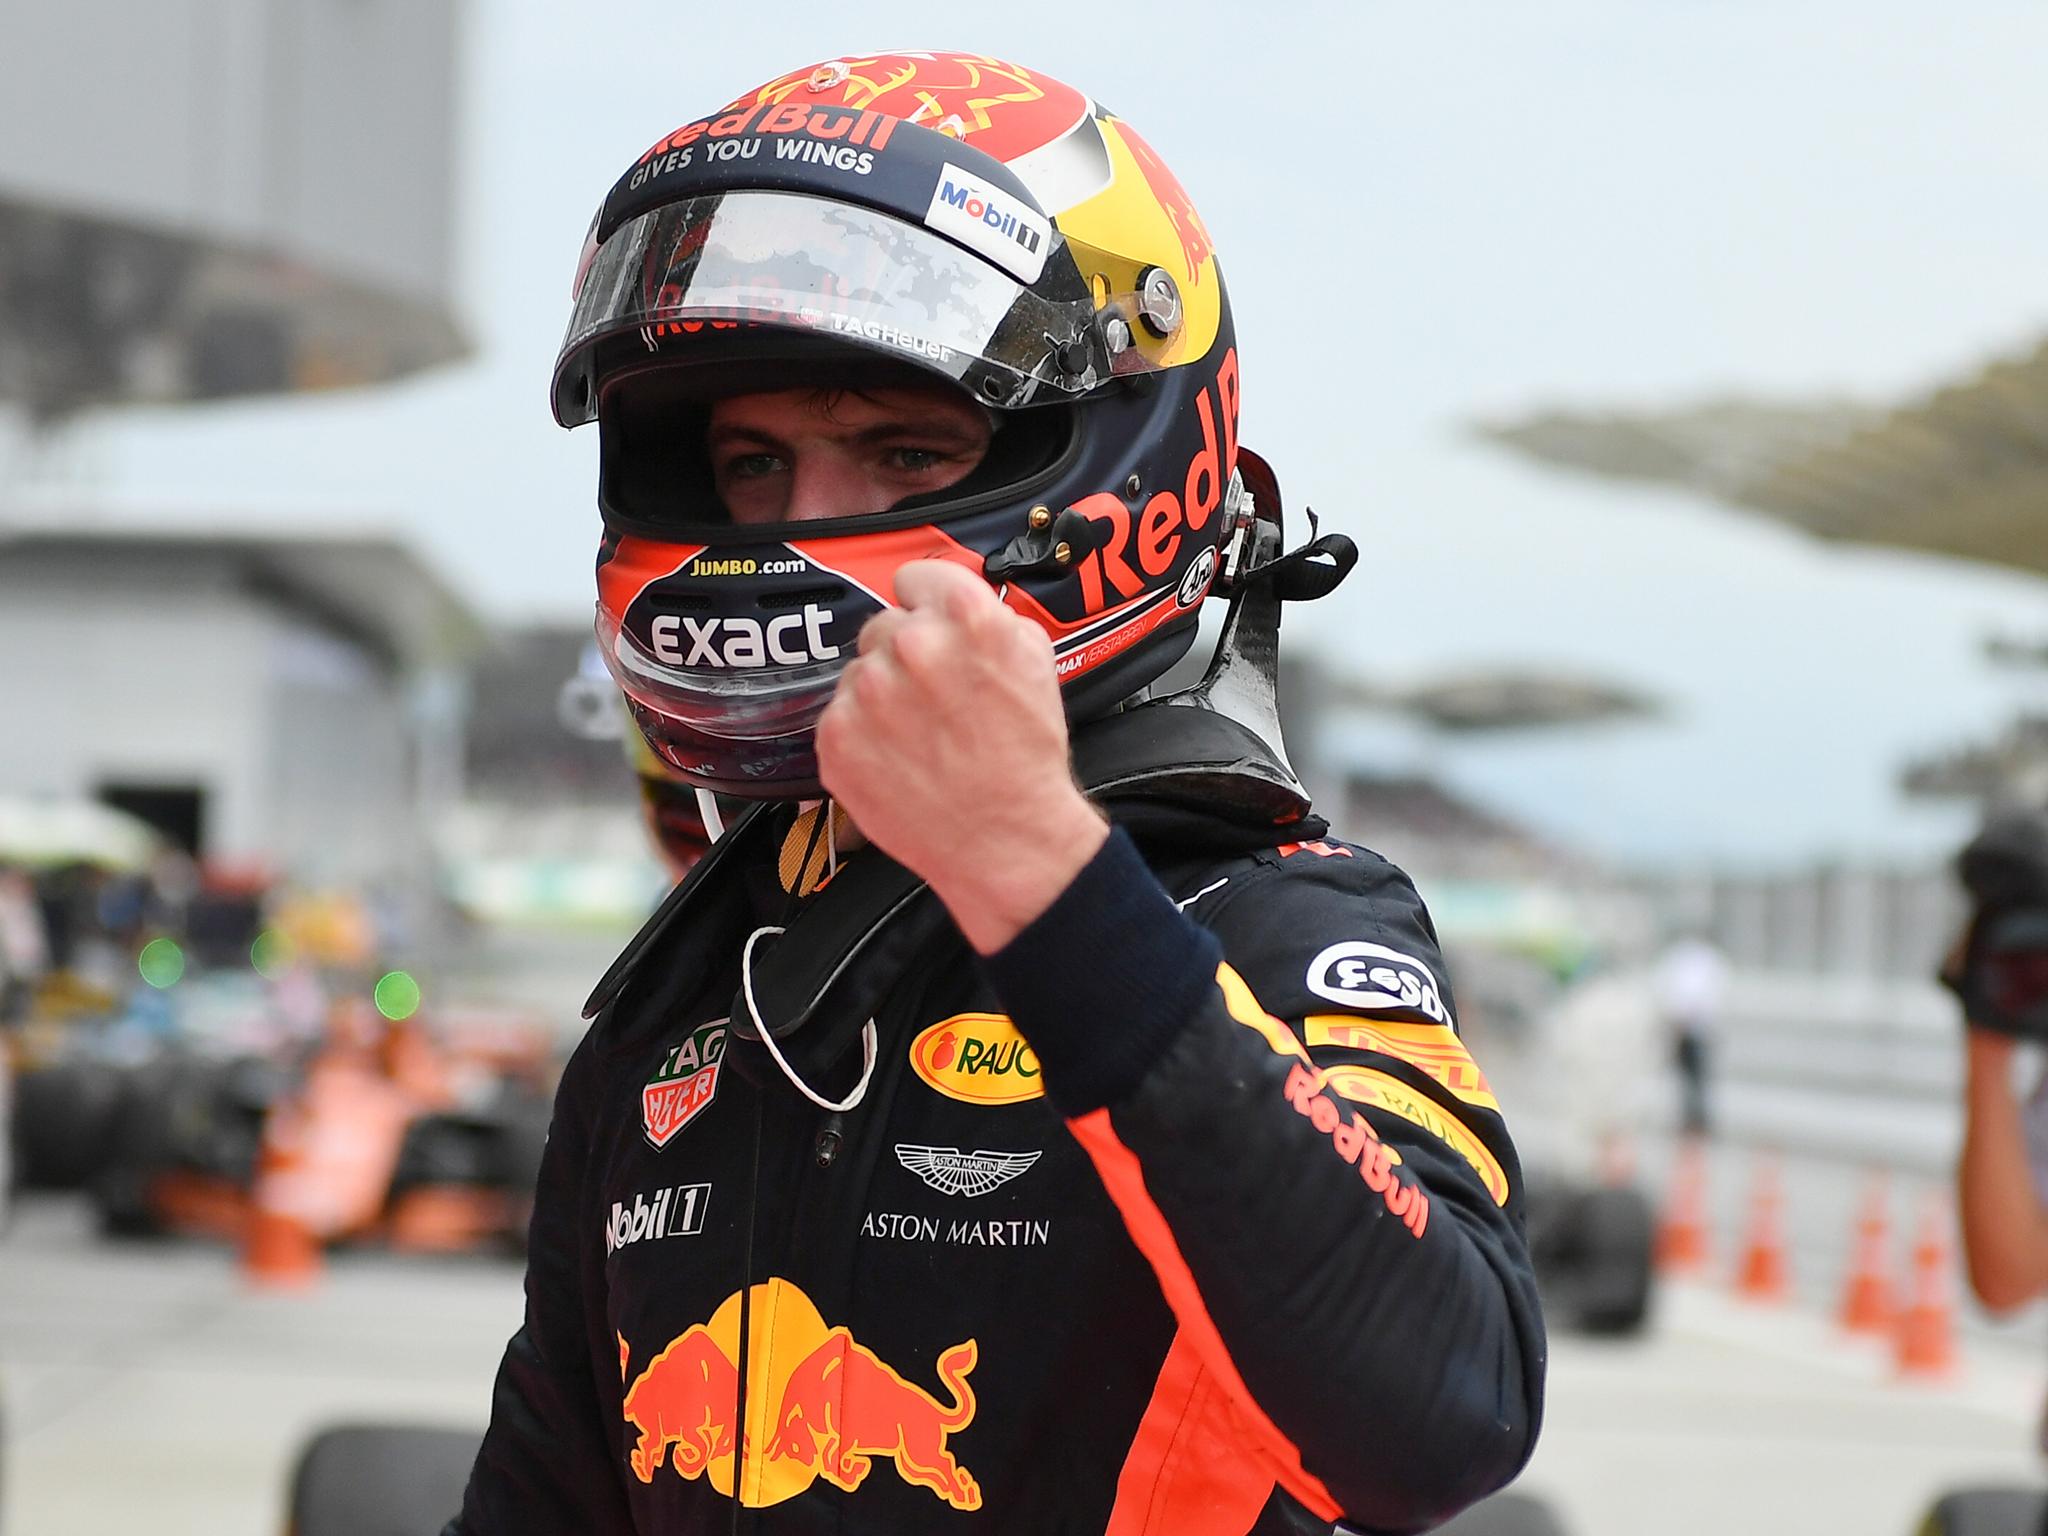 Max Verstappen celebrates winning the Malaysian Grand Prix with a dominant display